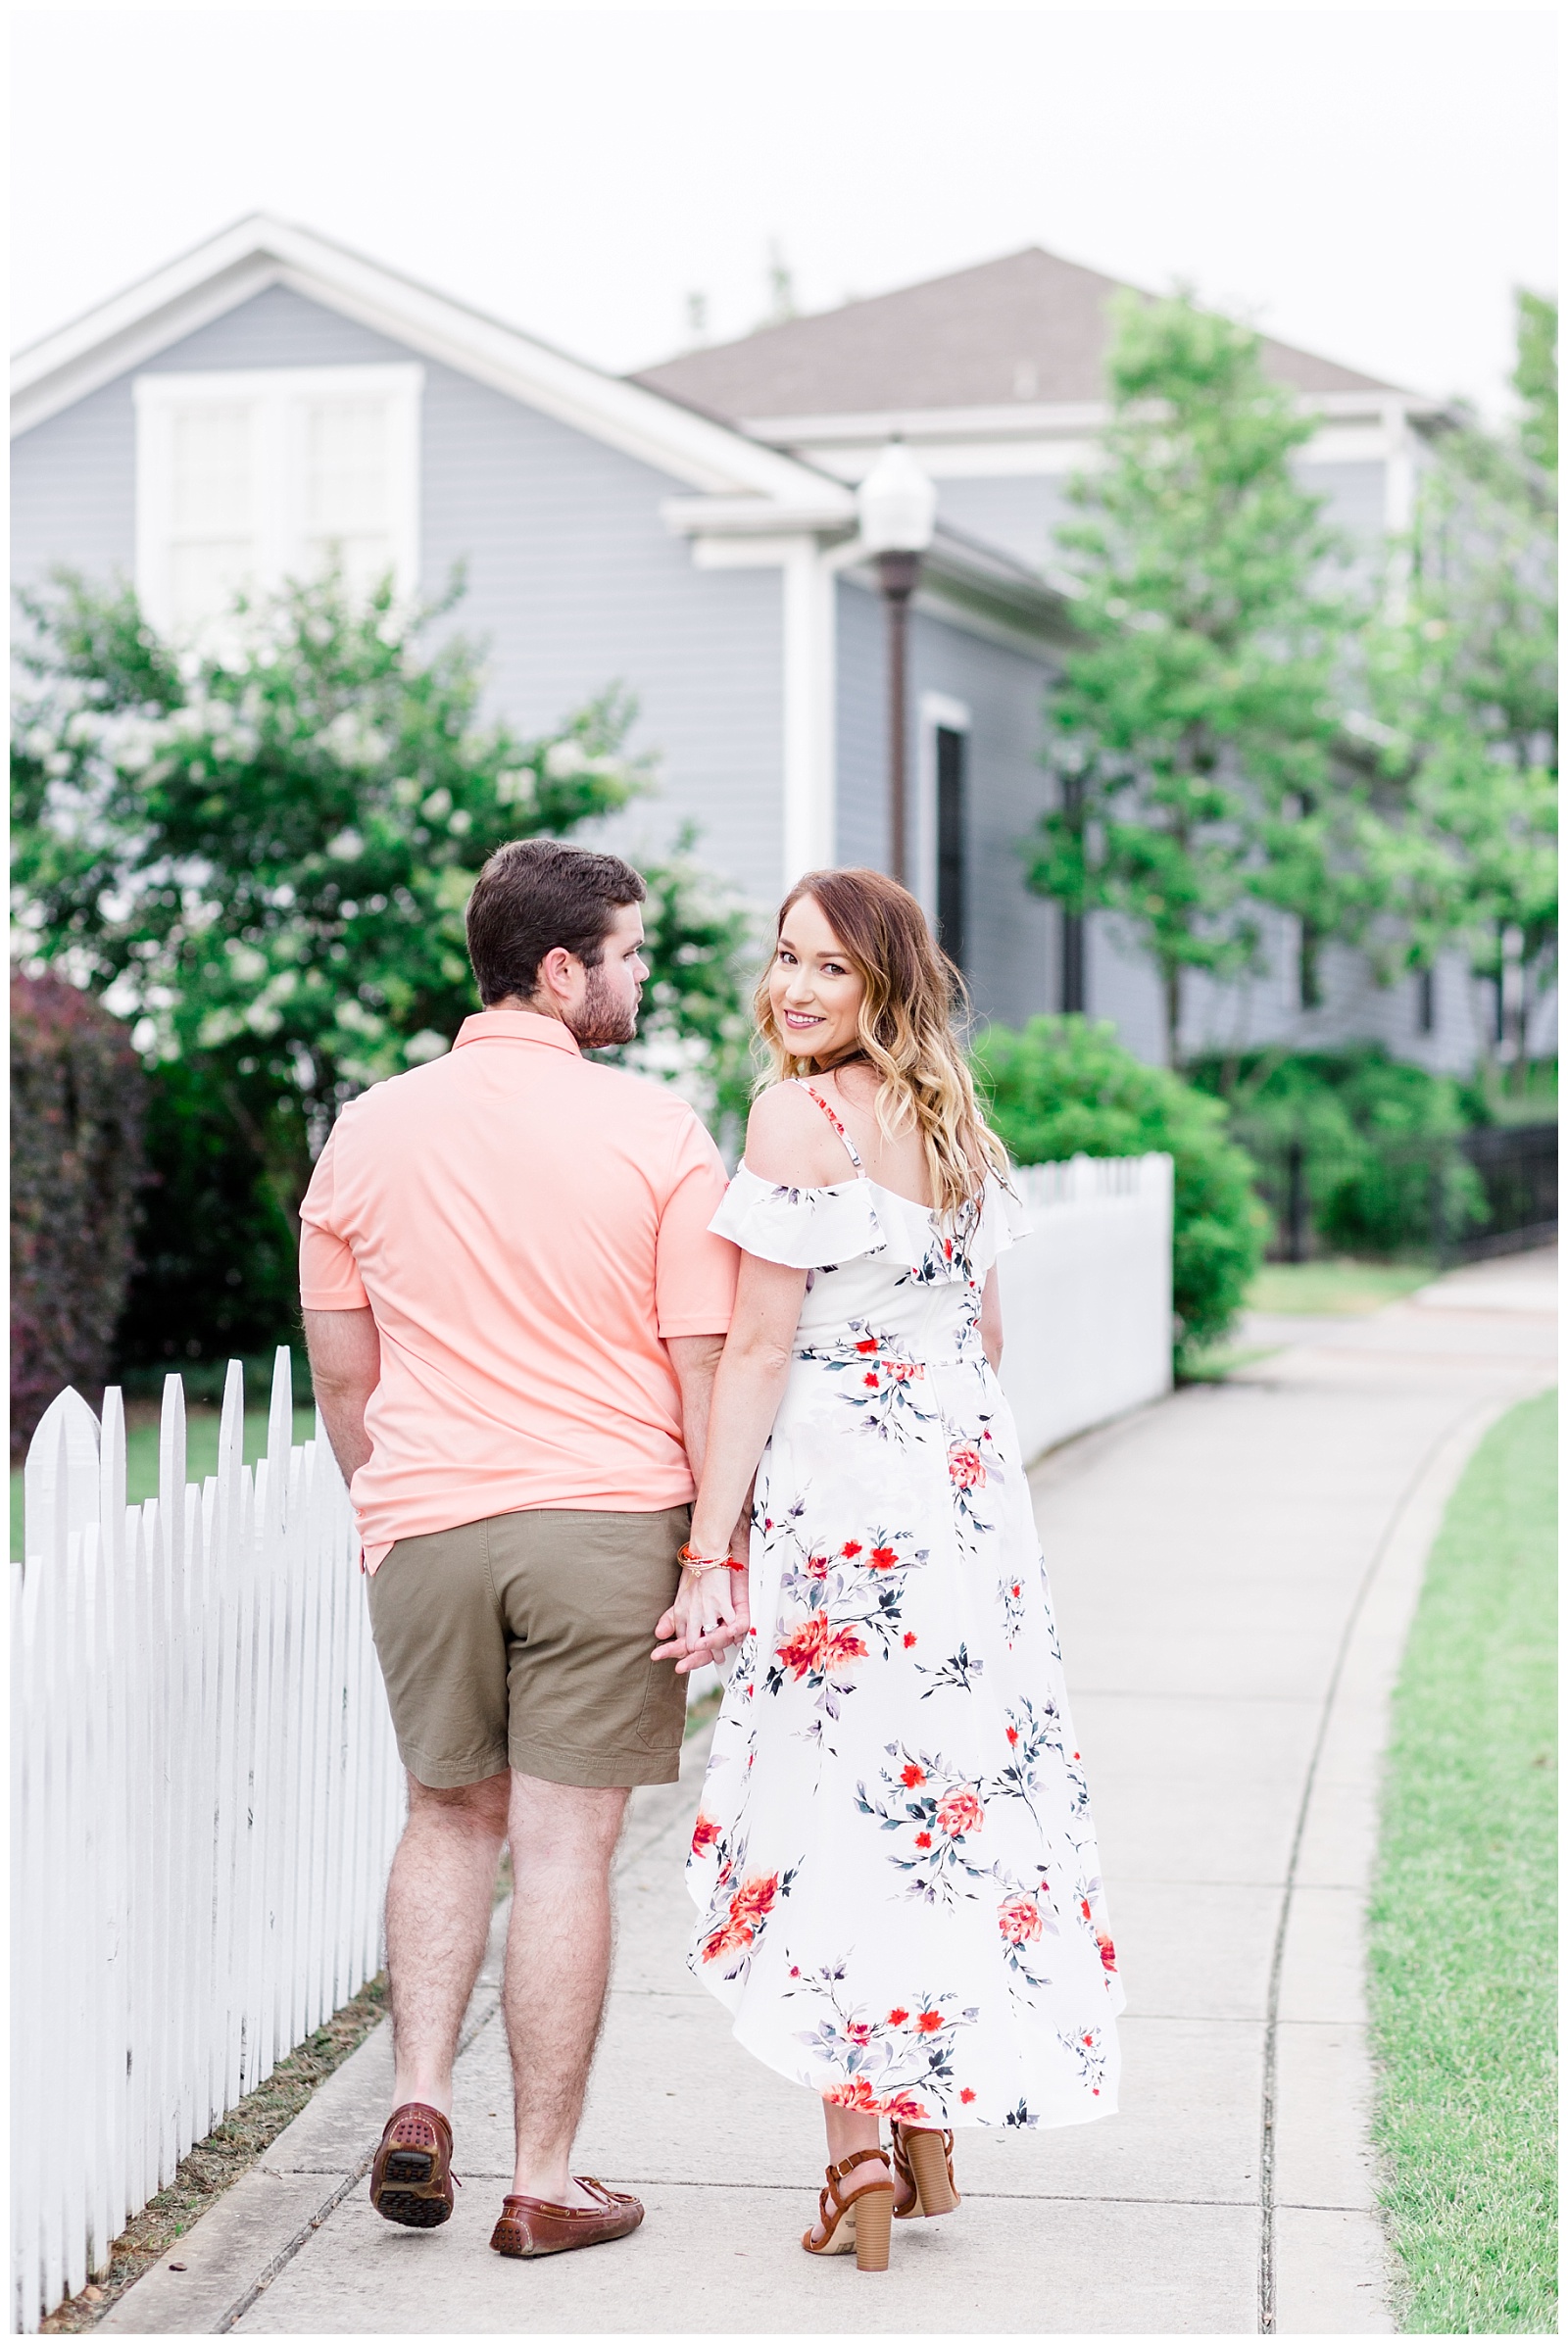 Downtown summer engagement session with dog in a white floral dress